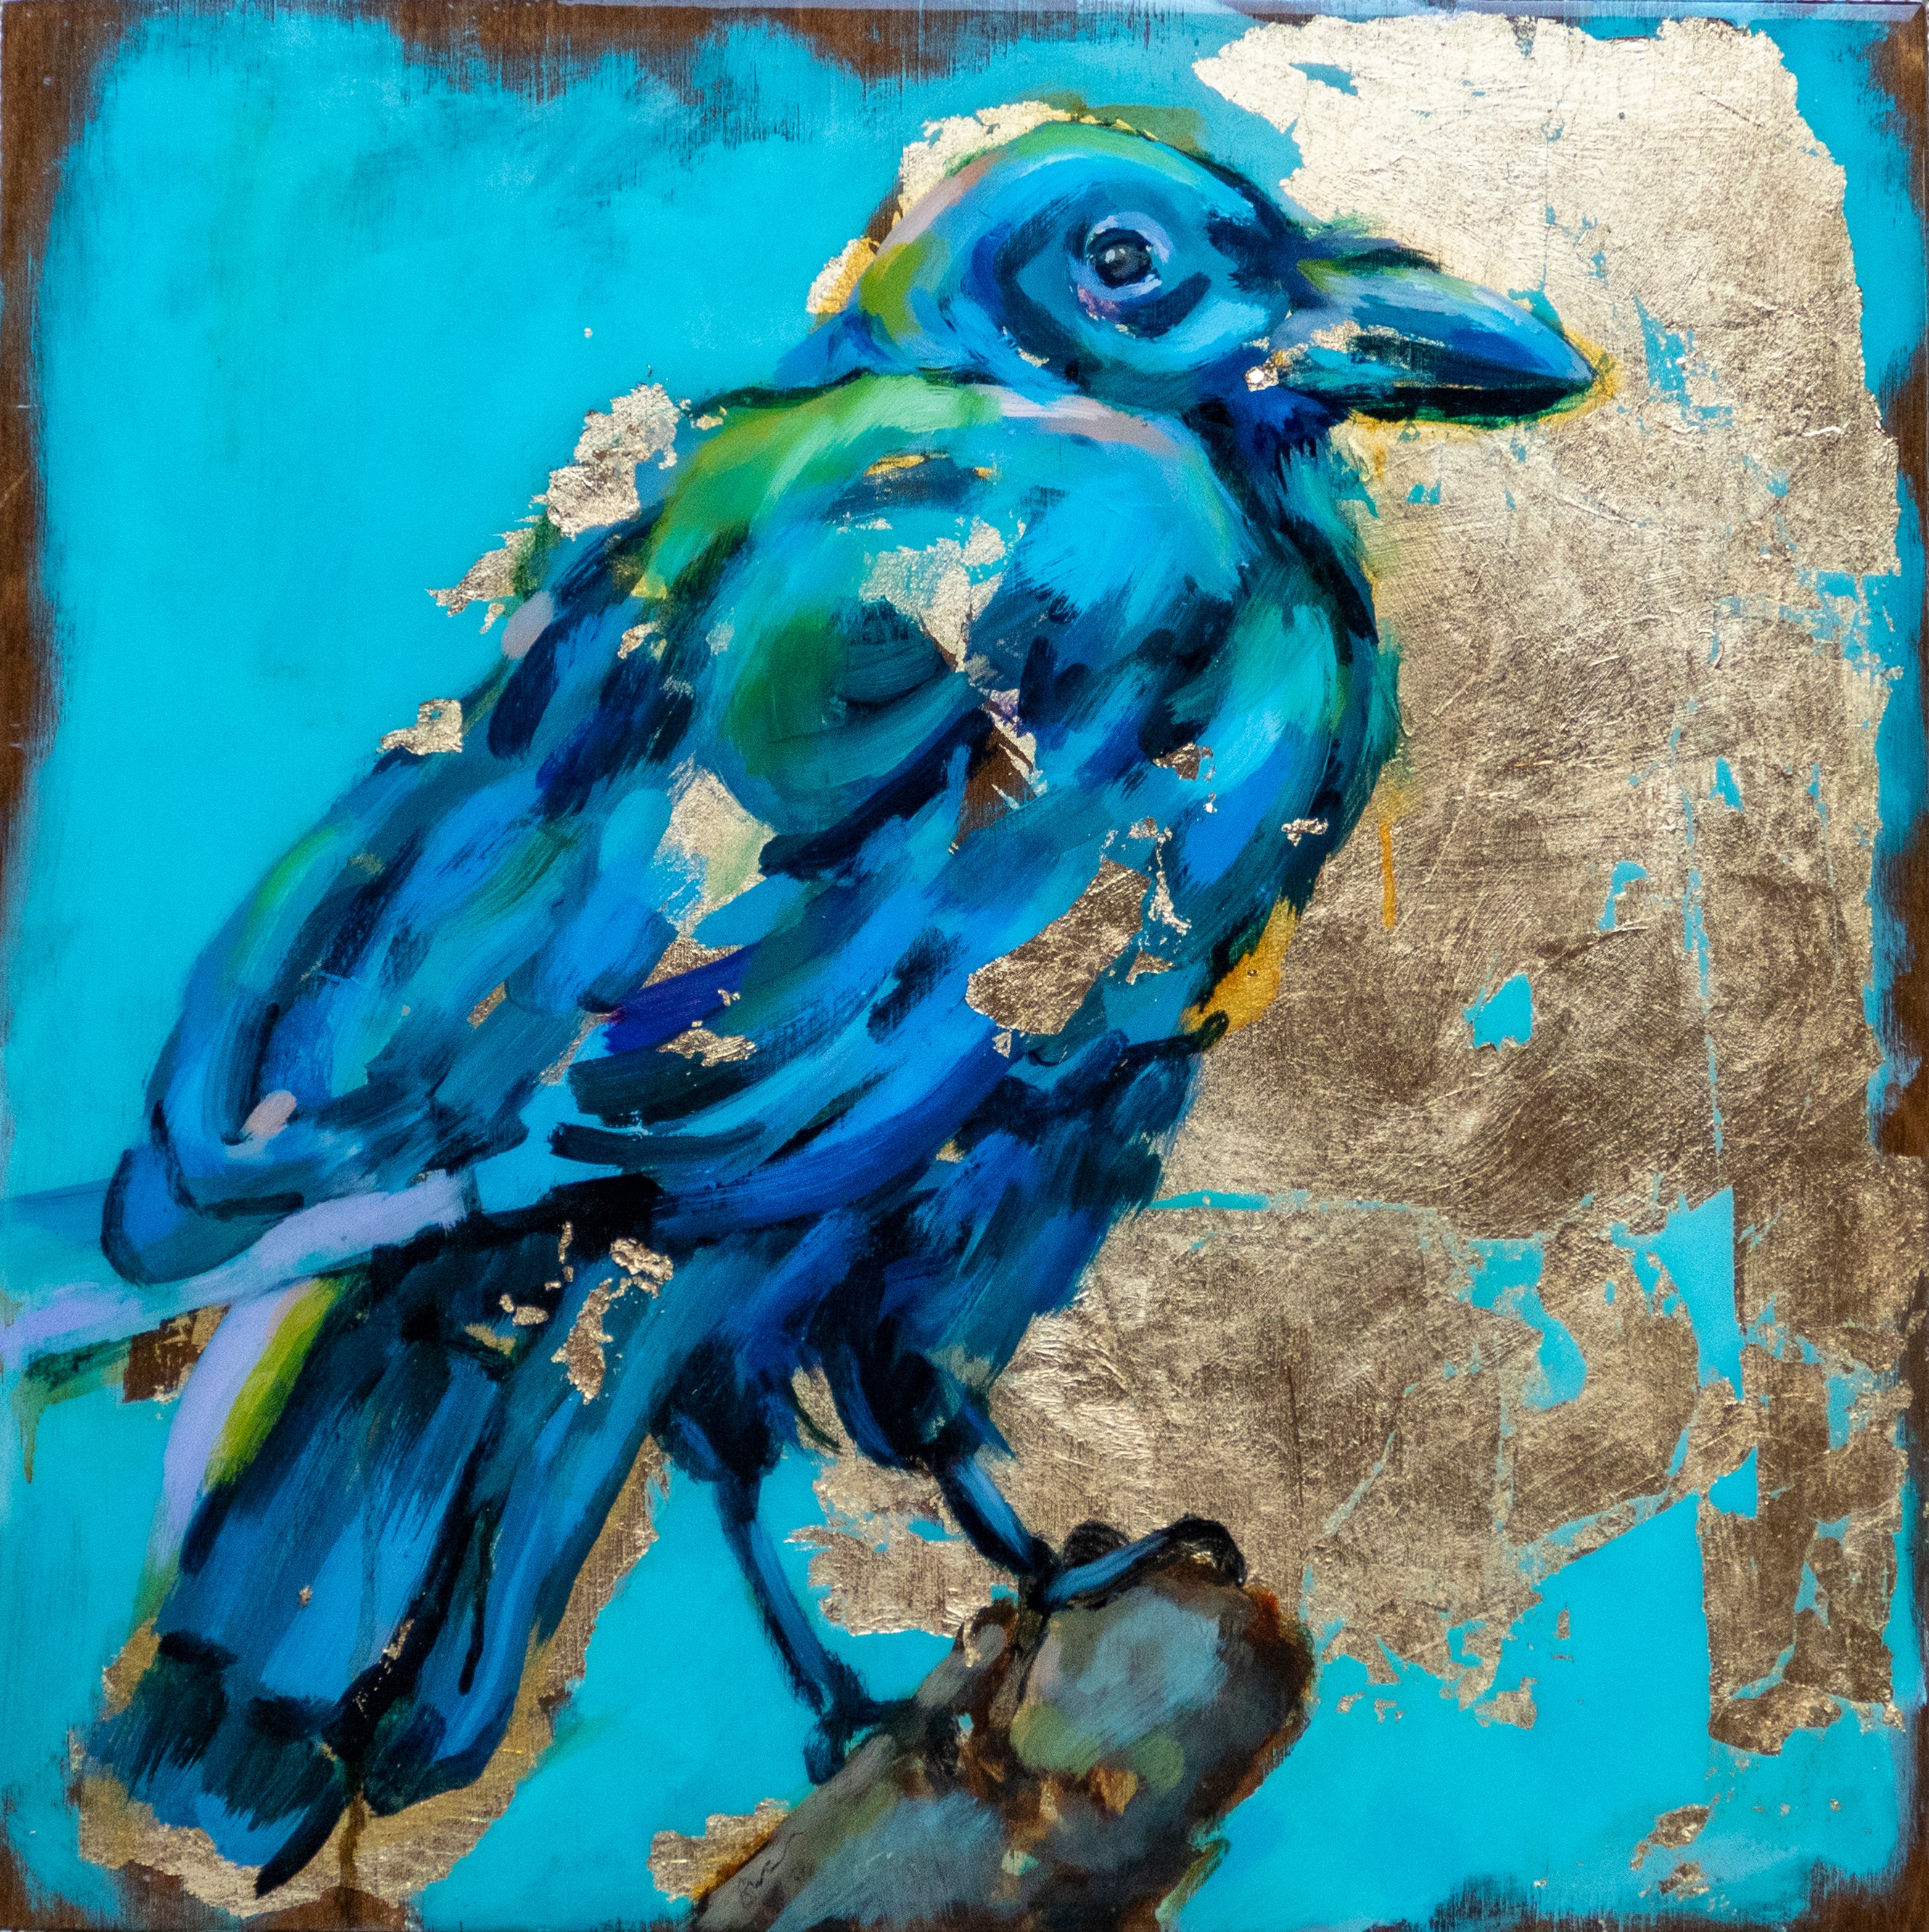 14"x14" painting of Raven using mixed media; acrylic and oil, pencil, and gold leaf with glossy resin finish on surface; shades of blue and gold; artist Shaney Watters